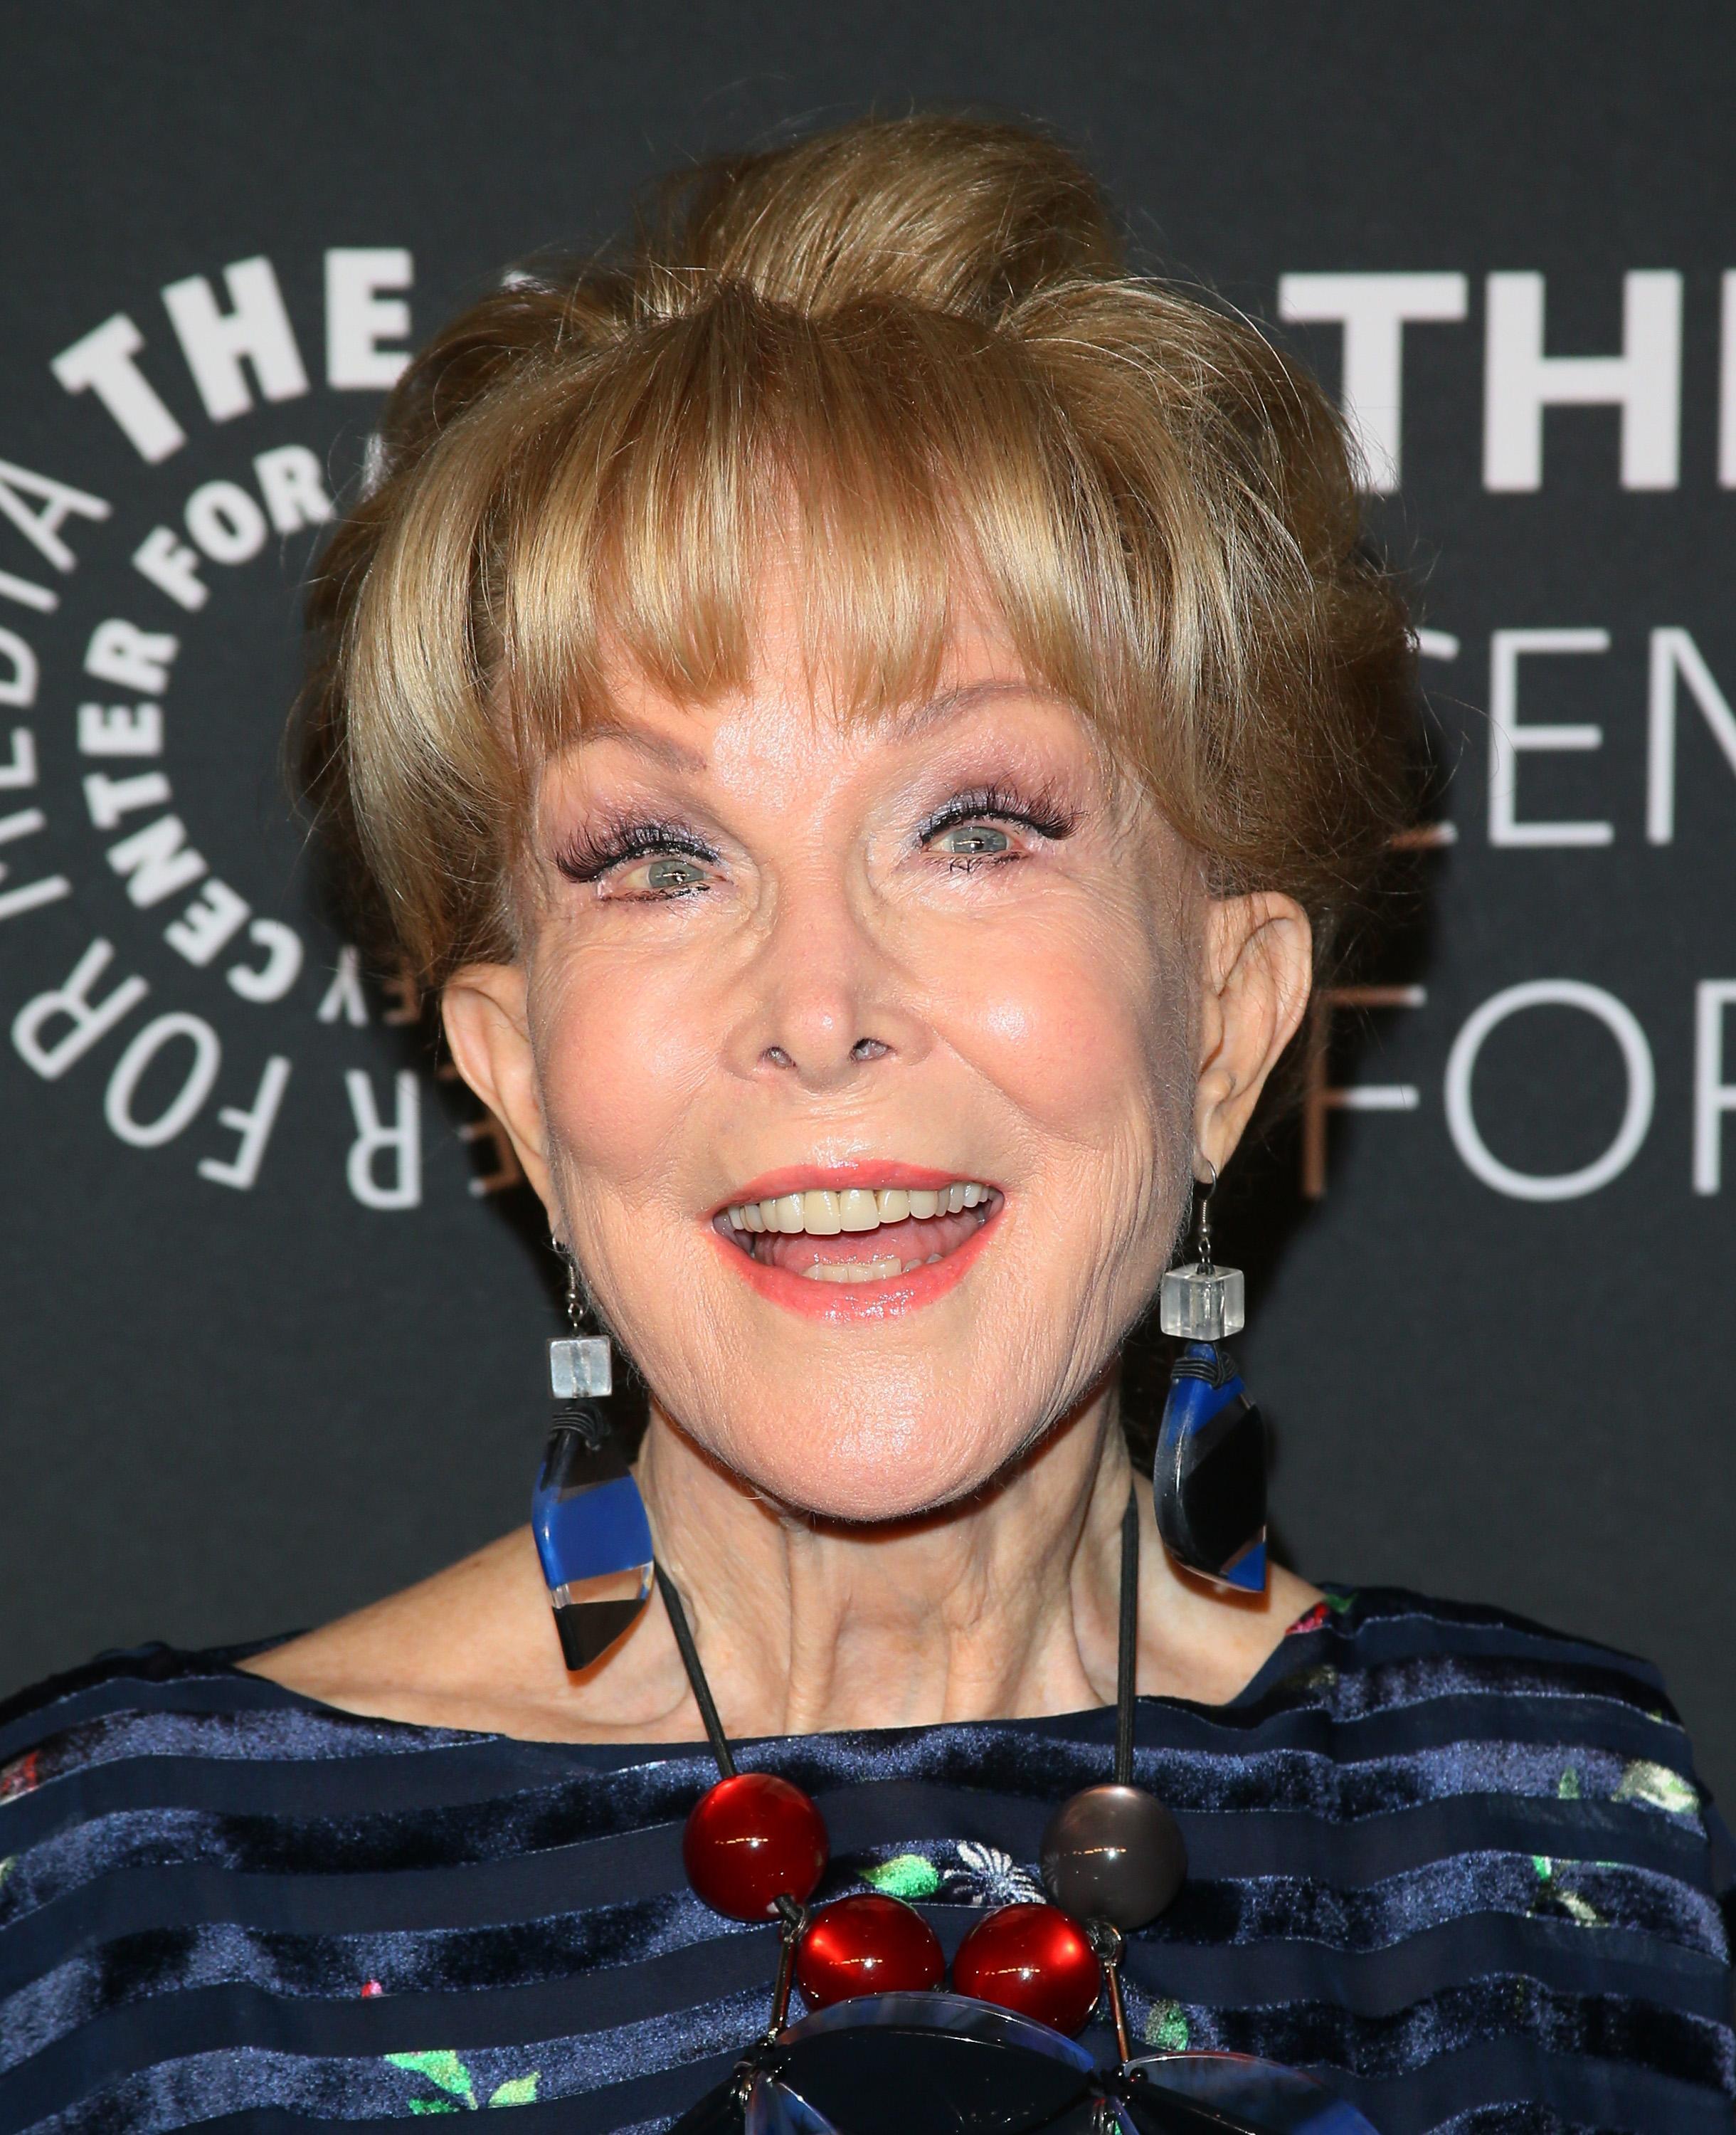 Barbara Eden attends an event honoring television's comedy legends in Beverly Hills, California on November 21, 2019 | Source: Getty Images